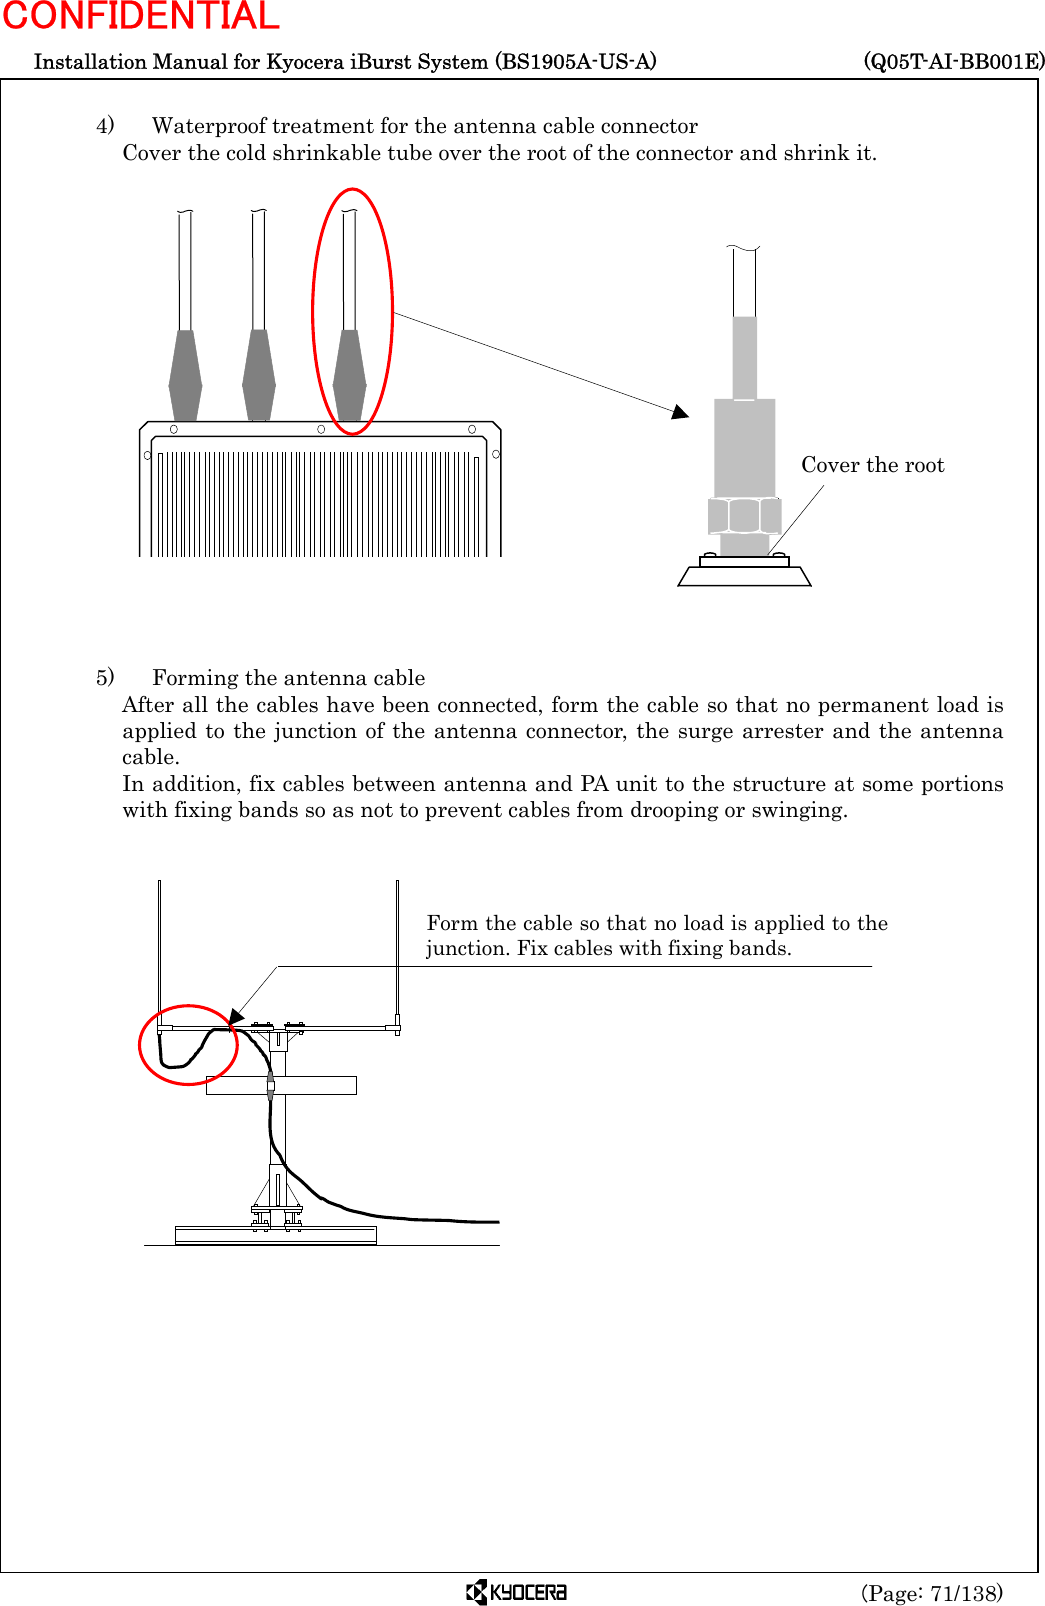  Installation Manual for Kyocera iBurst System (BS1905A-US-A)     (Q05T-AI-BB001E) (Page: 71/138) CONFIDENTIAL  4)   Waterproof treatment for the antenna cable connector   Cover the cold shrinkable tube over the root of the connector and shrink it.                    5)    Forming the antenna cable After all the cables have been connected, form the cable so that no permanent load is applied to the junction of the antenna connector, the surge arrester and the antenna cable. In addition, fix cables between antenna and PA unit to the structure at some portions with fixing bands so as not to prevent cables from drooping or swinging.              Form the cable so that no load is applied to thejunction. Fix cables with fixing bands. Cover the root 